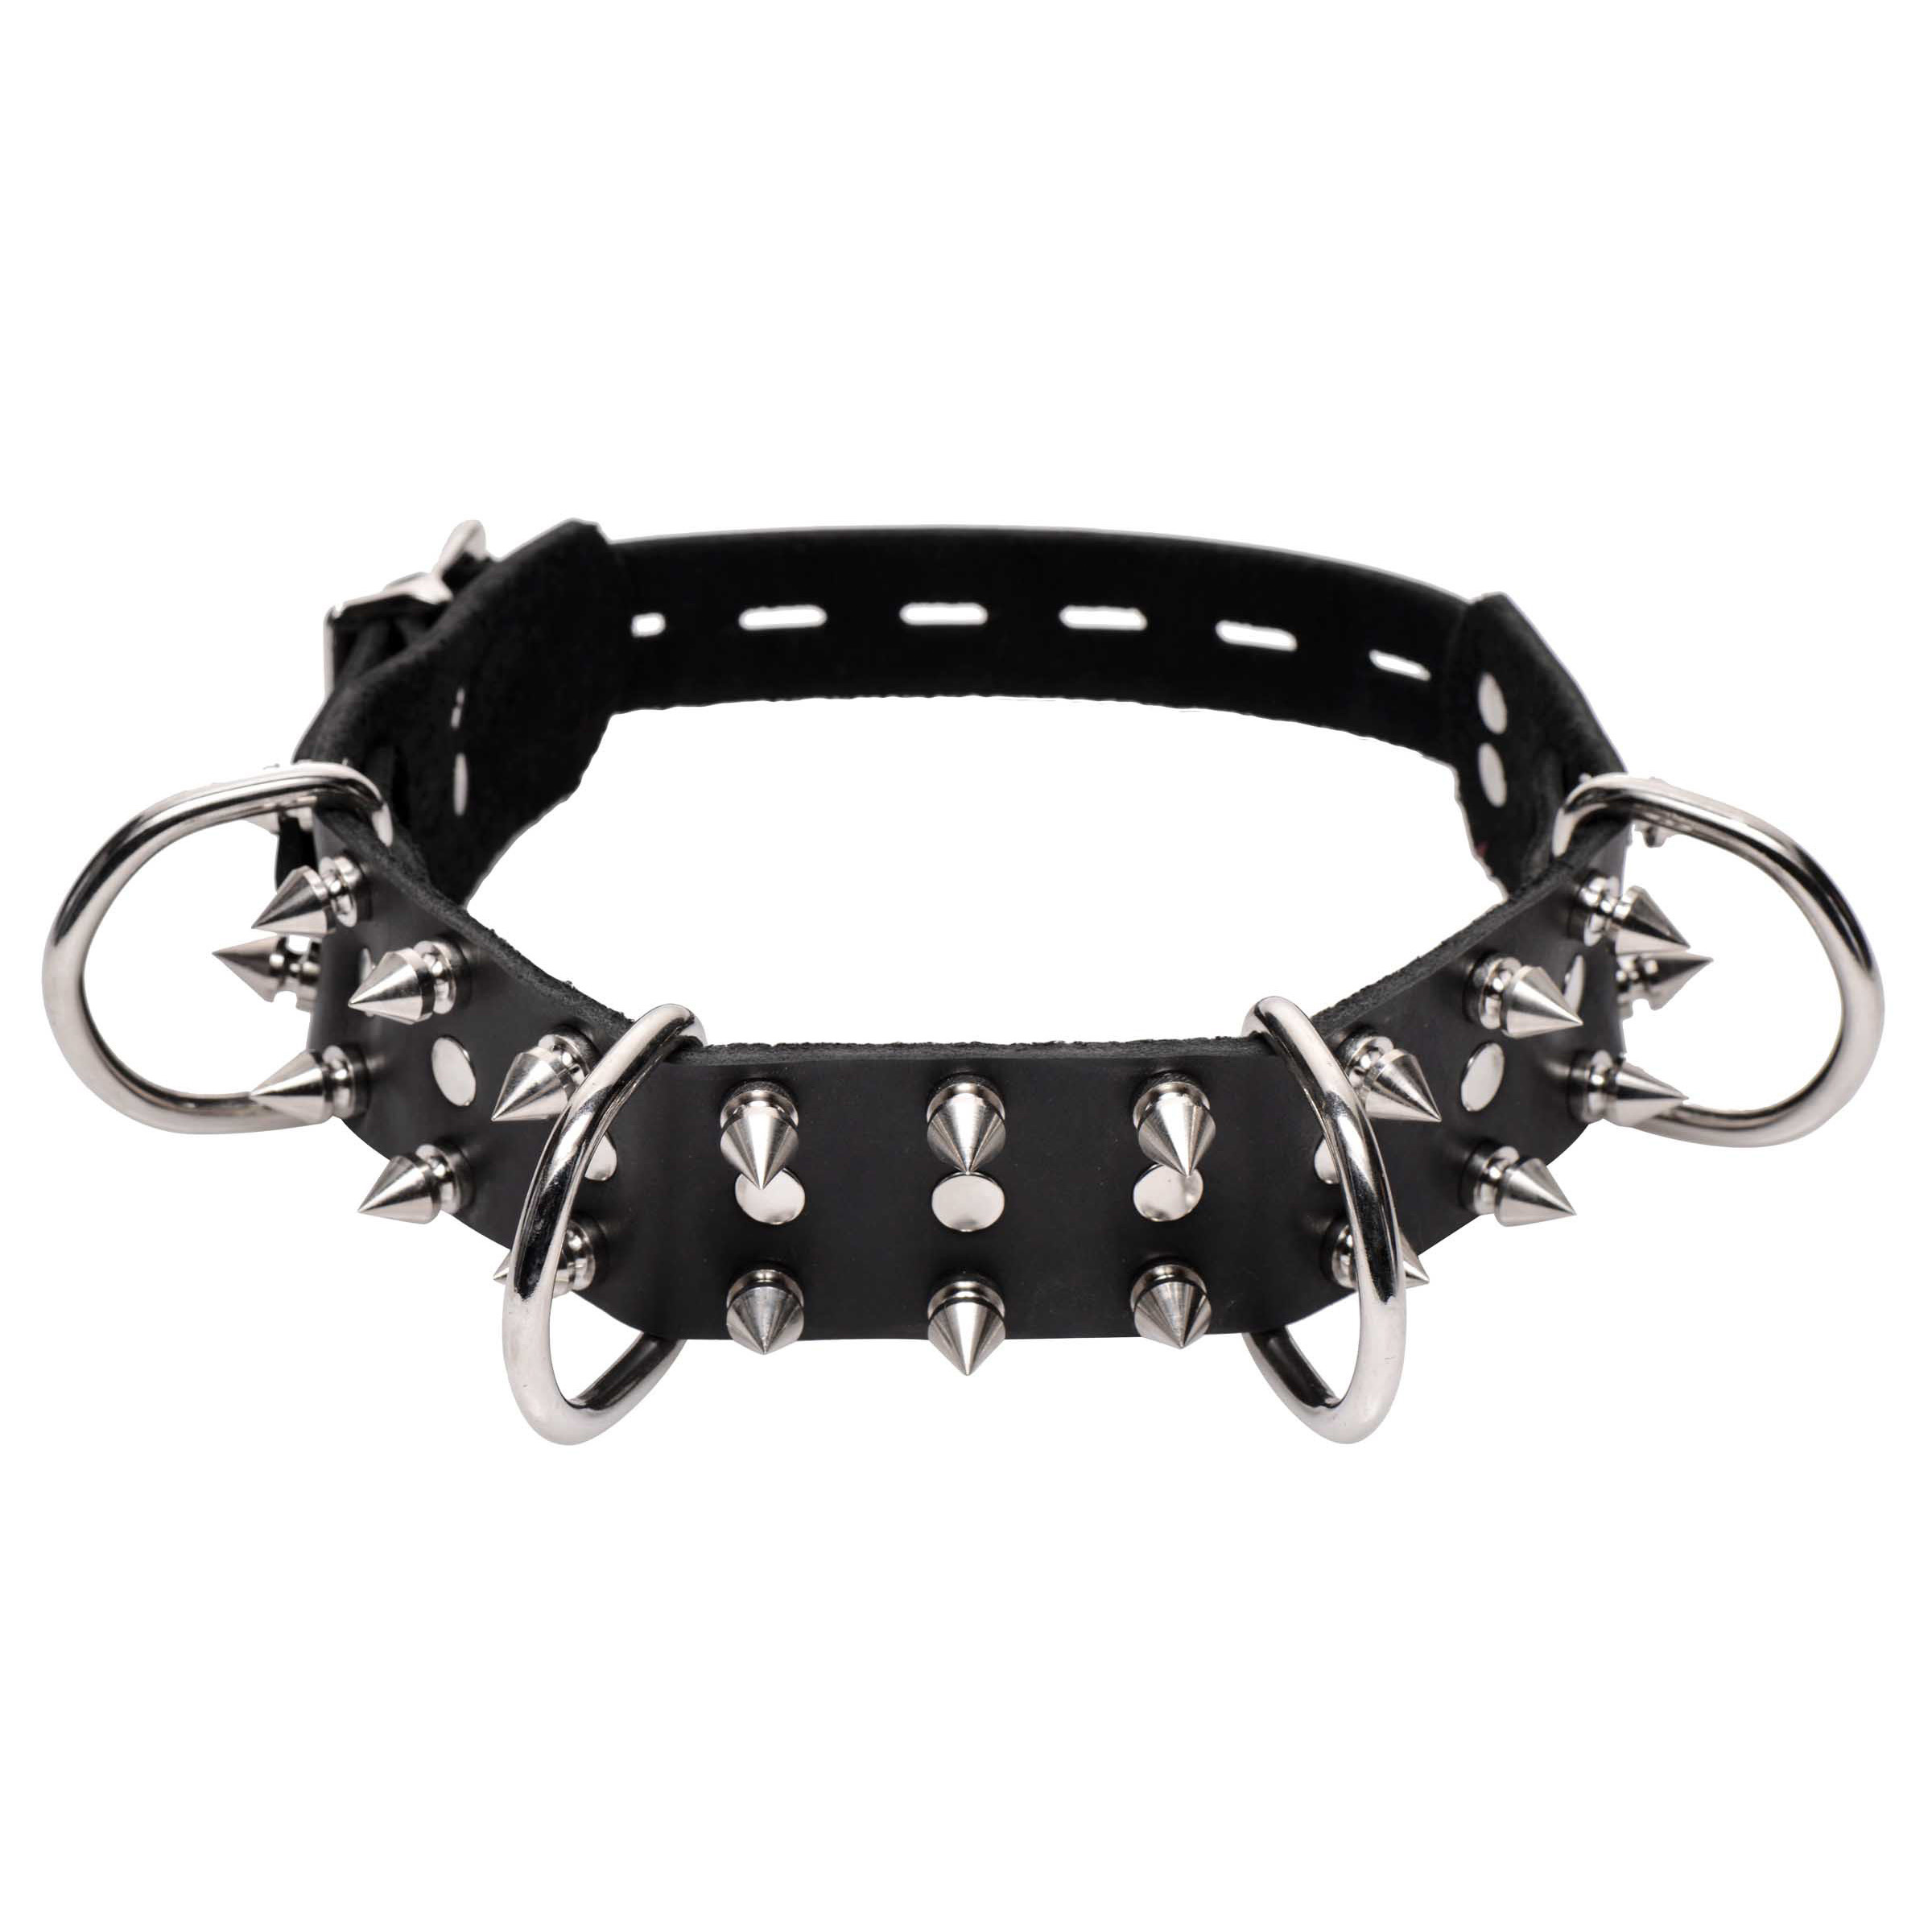 STRICT LEATHER SPIKED DOG COLLAR